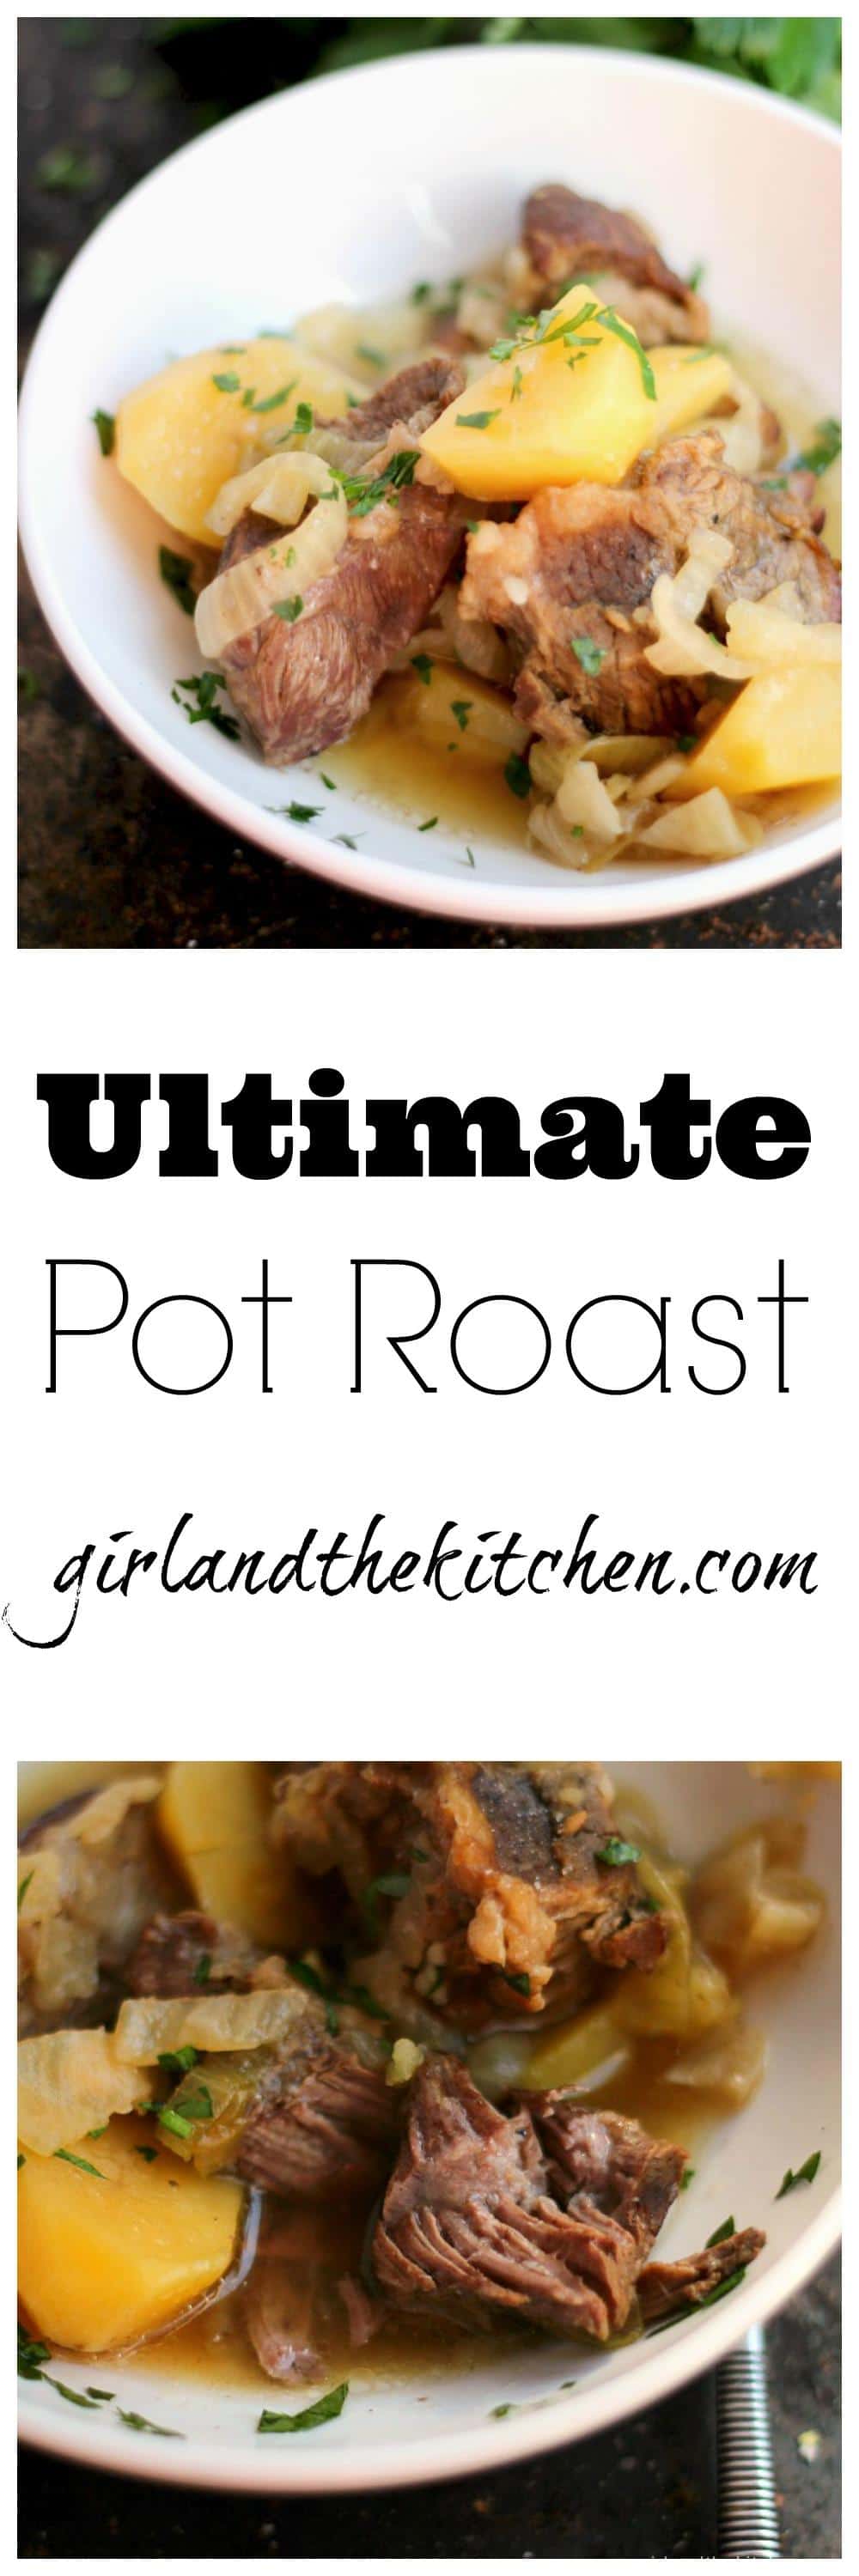 Ultimate Pot Roast...жаркое from the Girl and the Kitchen